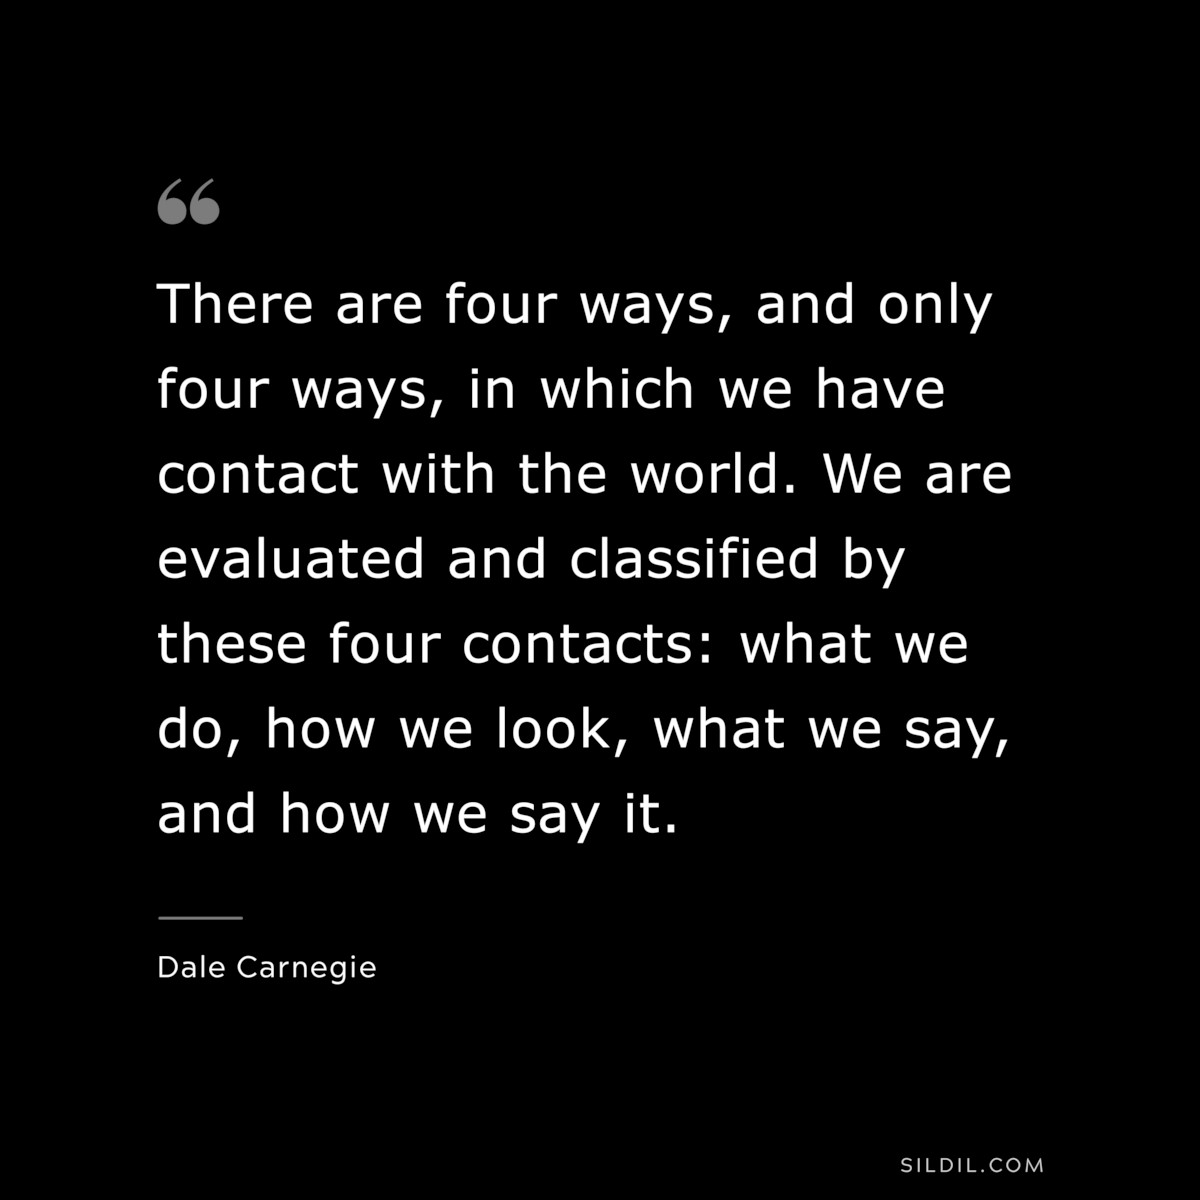 There are four ways, and only four ways, in which we have contact with the world. We are evaluated and classified by these four contacts: what we do, how we look, what we say, and how we say it.― Dale Carnegie